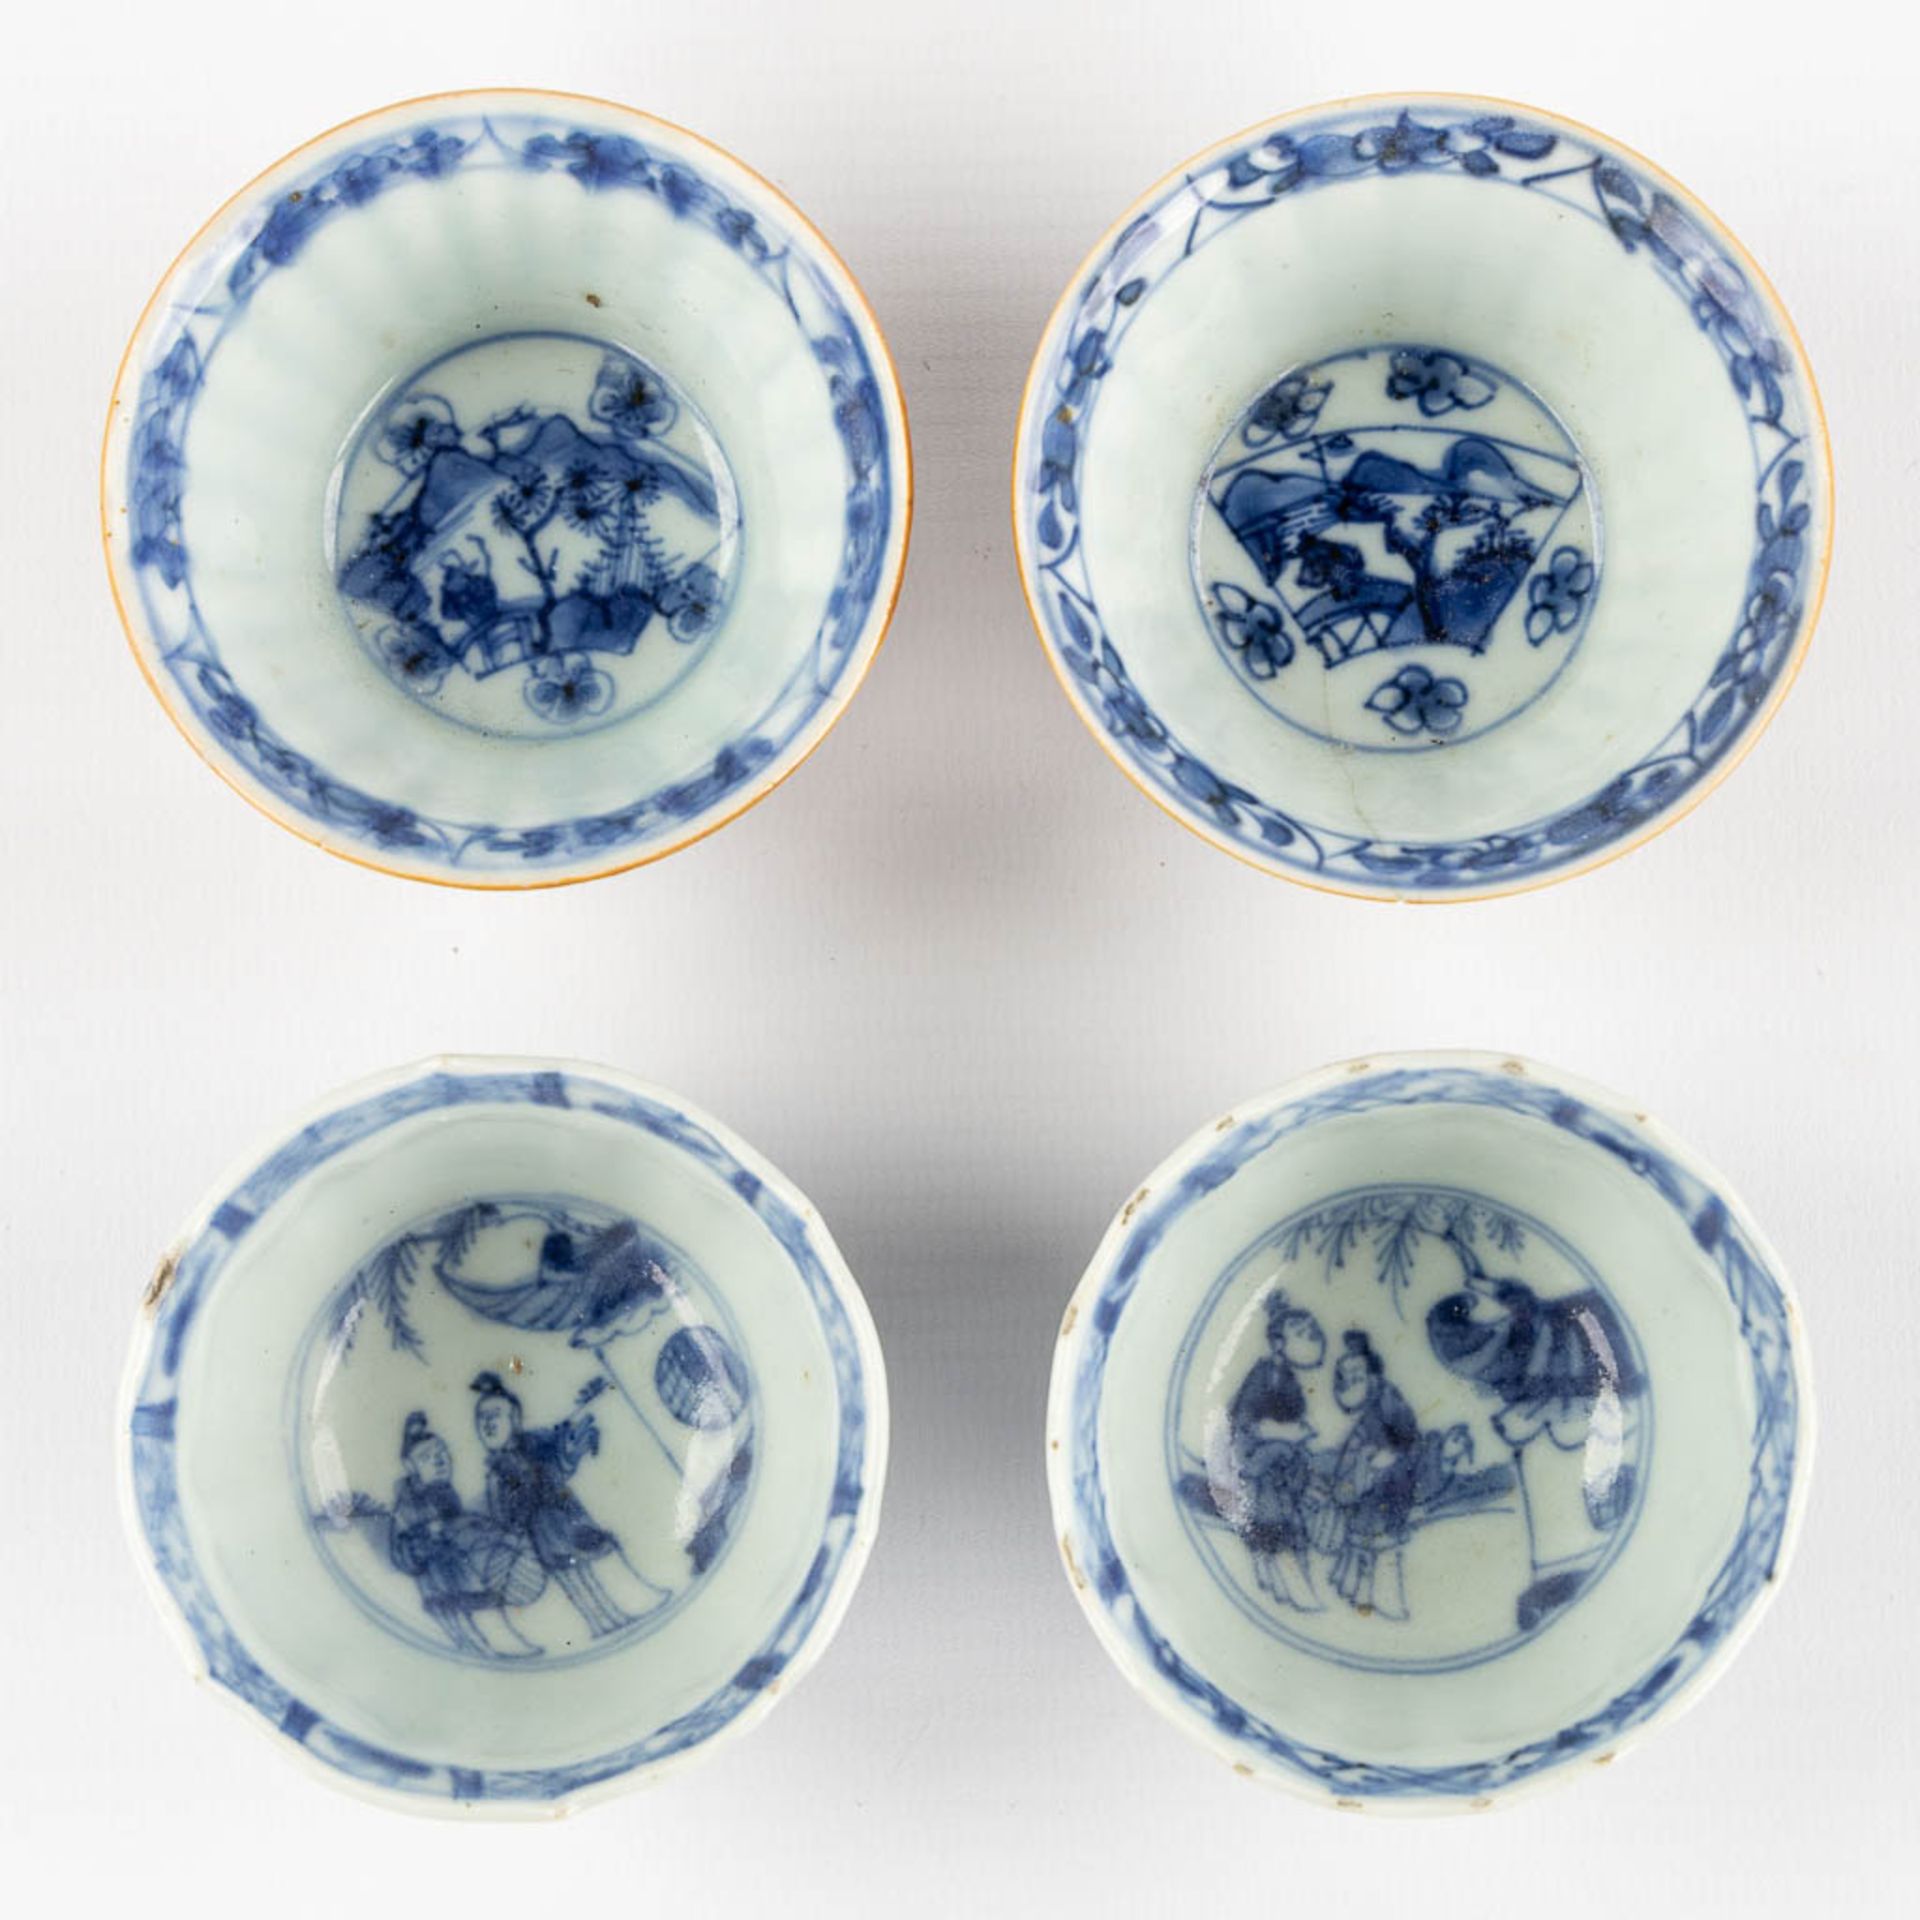 Fifteen Chinese cups, saucers and plates, blue white and Famille Roze. (D:23,4 cm) - Image 13 of 15